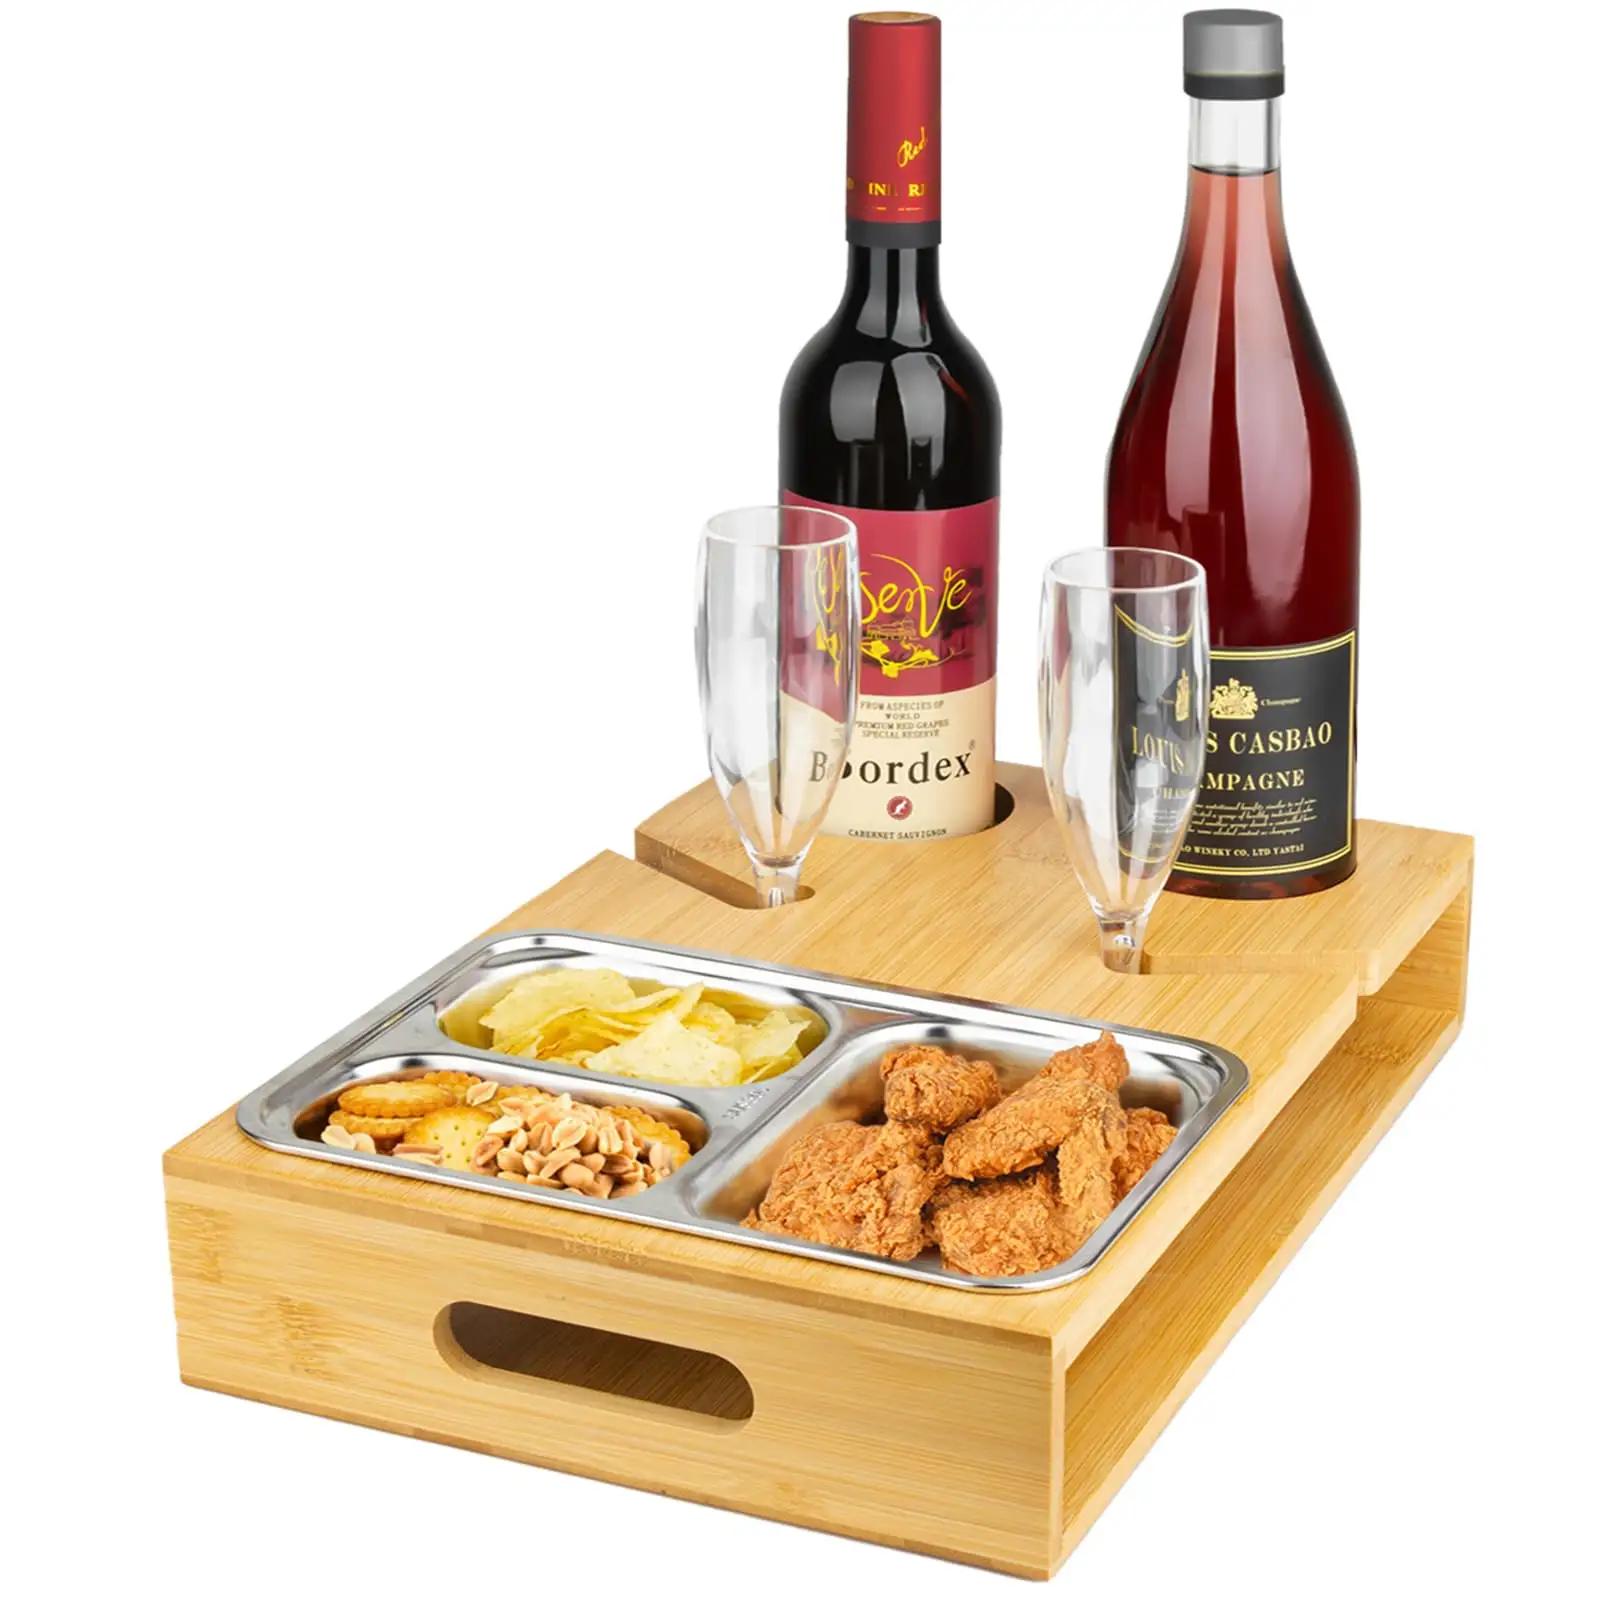 Living Room Movie Night Entertainment Serving Tray Wooden Snack Tray Caddy for Drinks Wood Snack Bowls and Tray